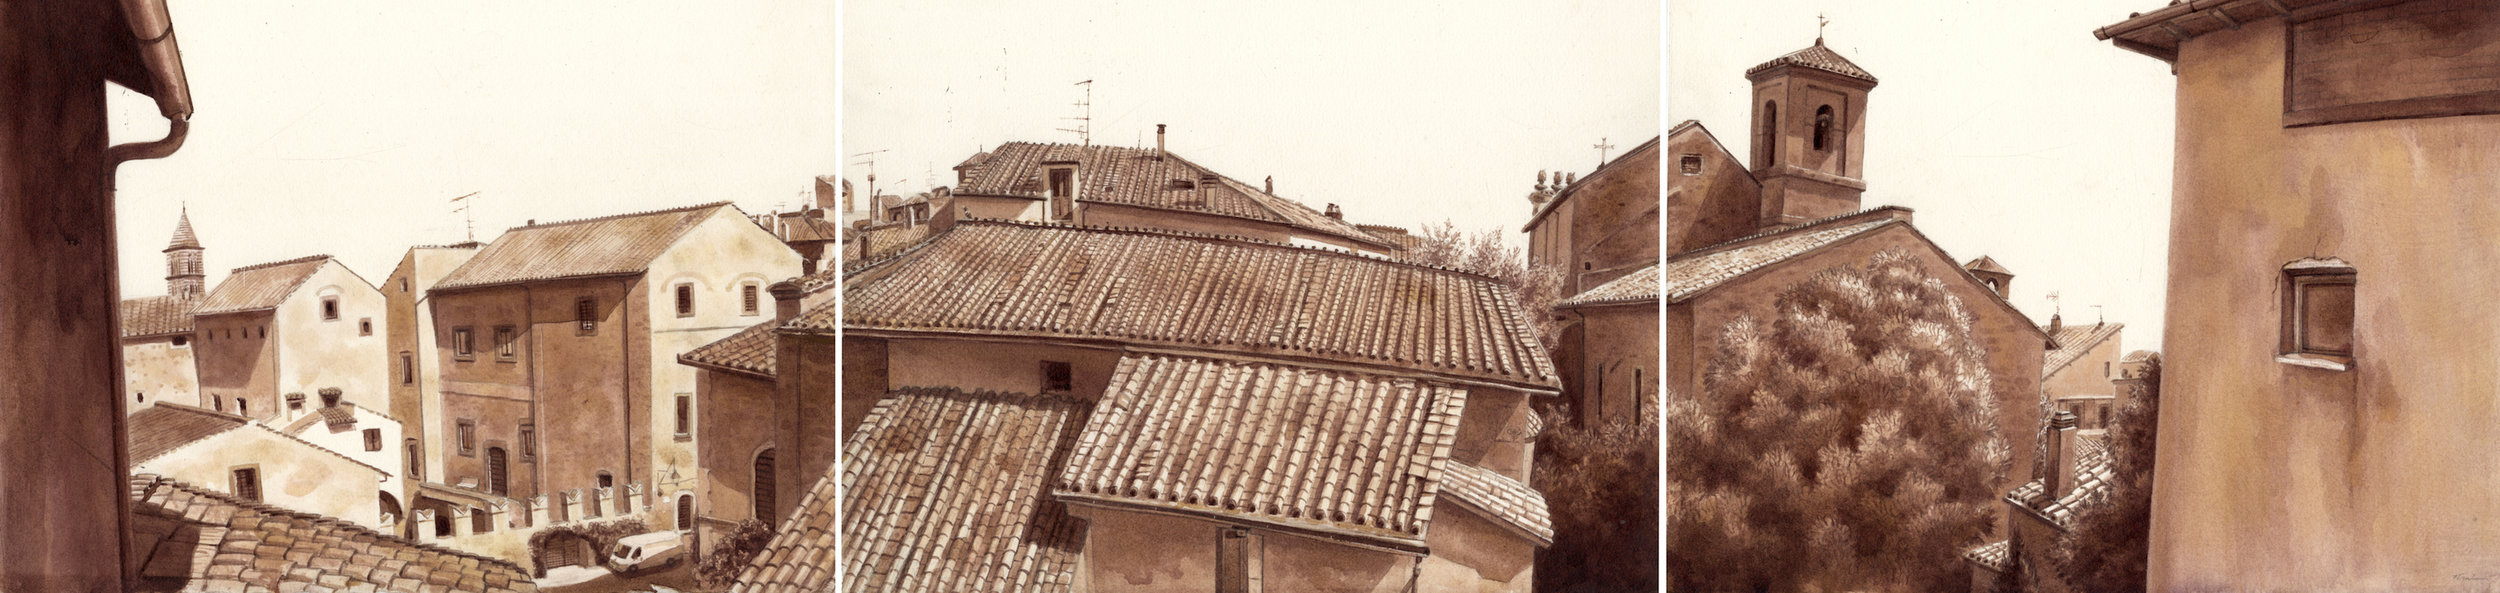 Rooftop View of an Italian Town (tryptic)